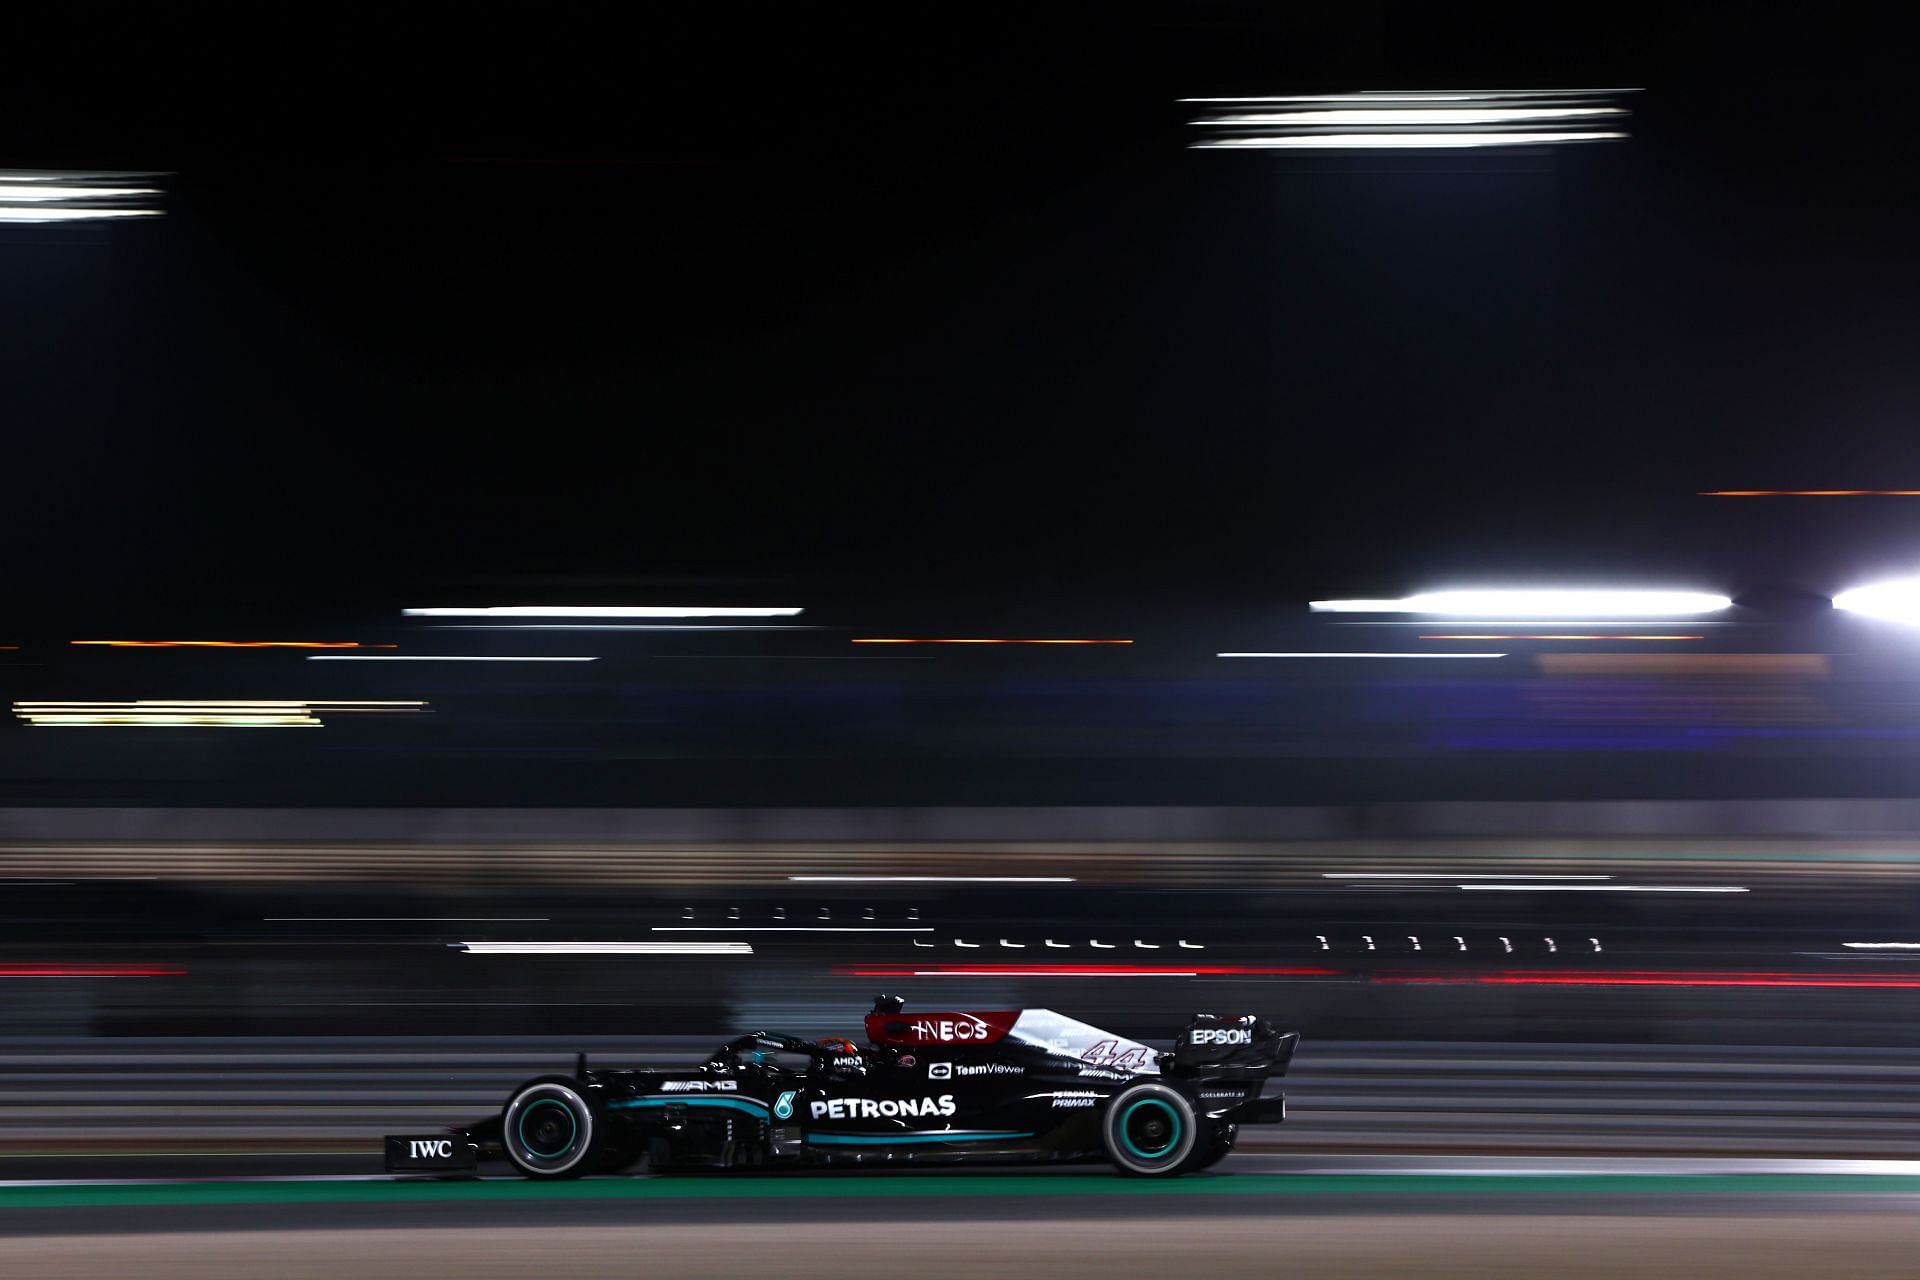 F1 Grand Prix of Qatar - Lewis Hamilton well in the lead during the main race on Sunday.